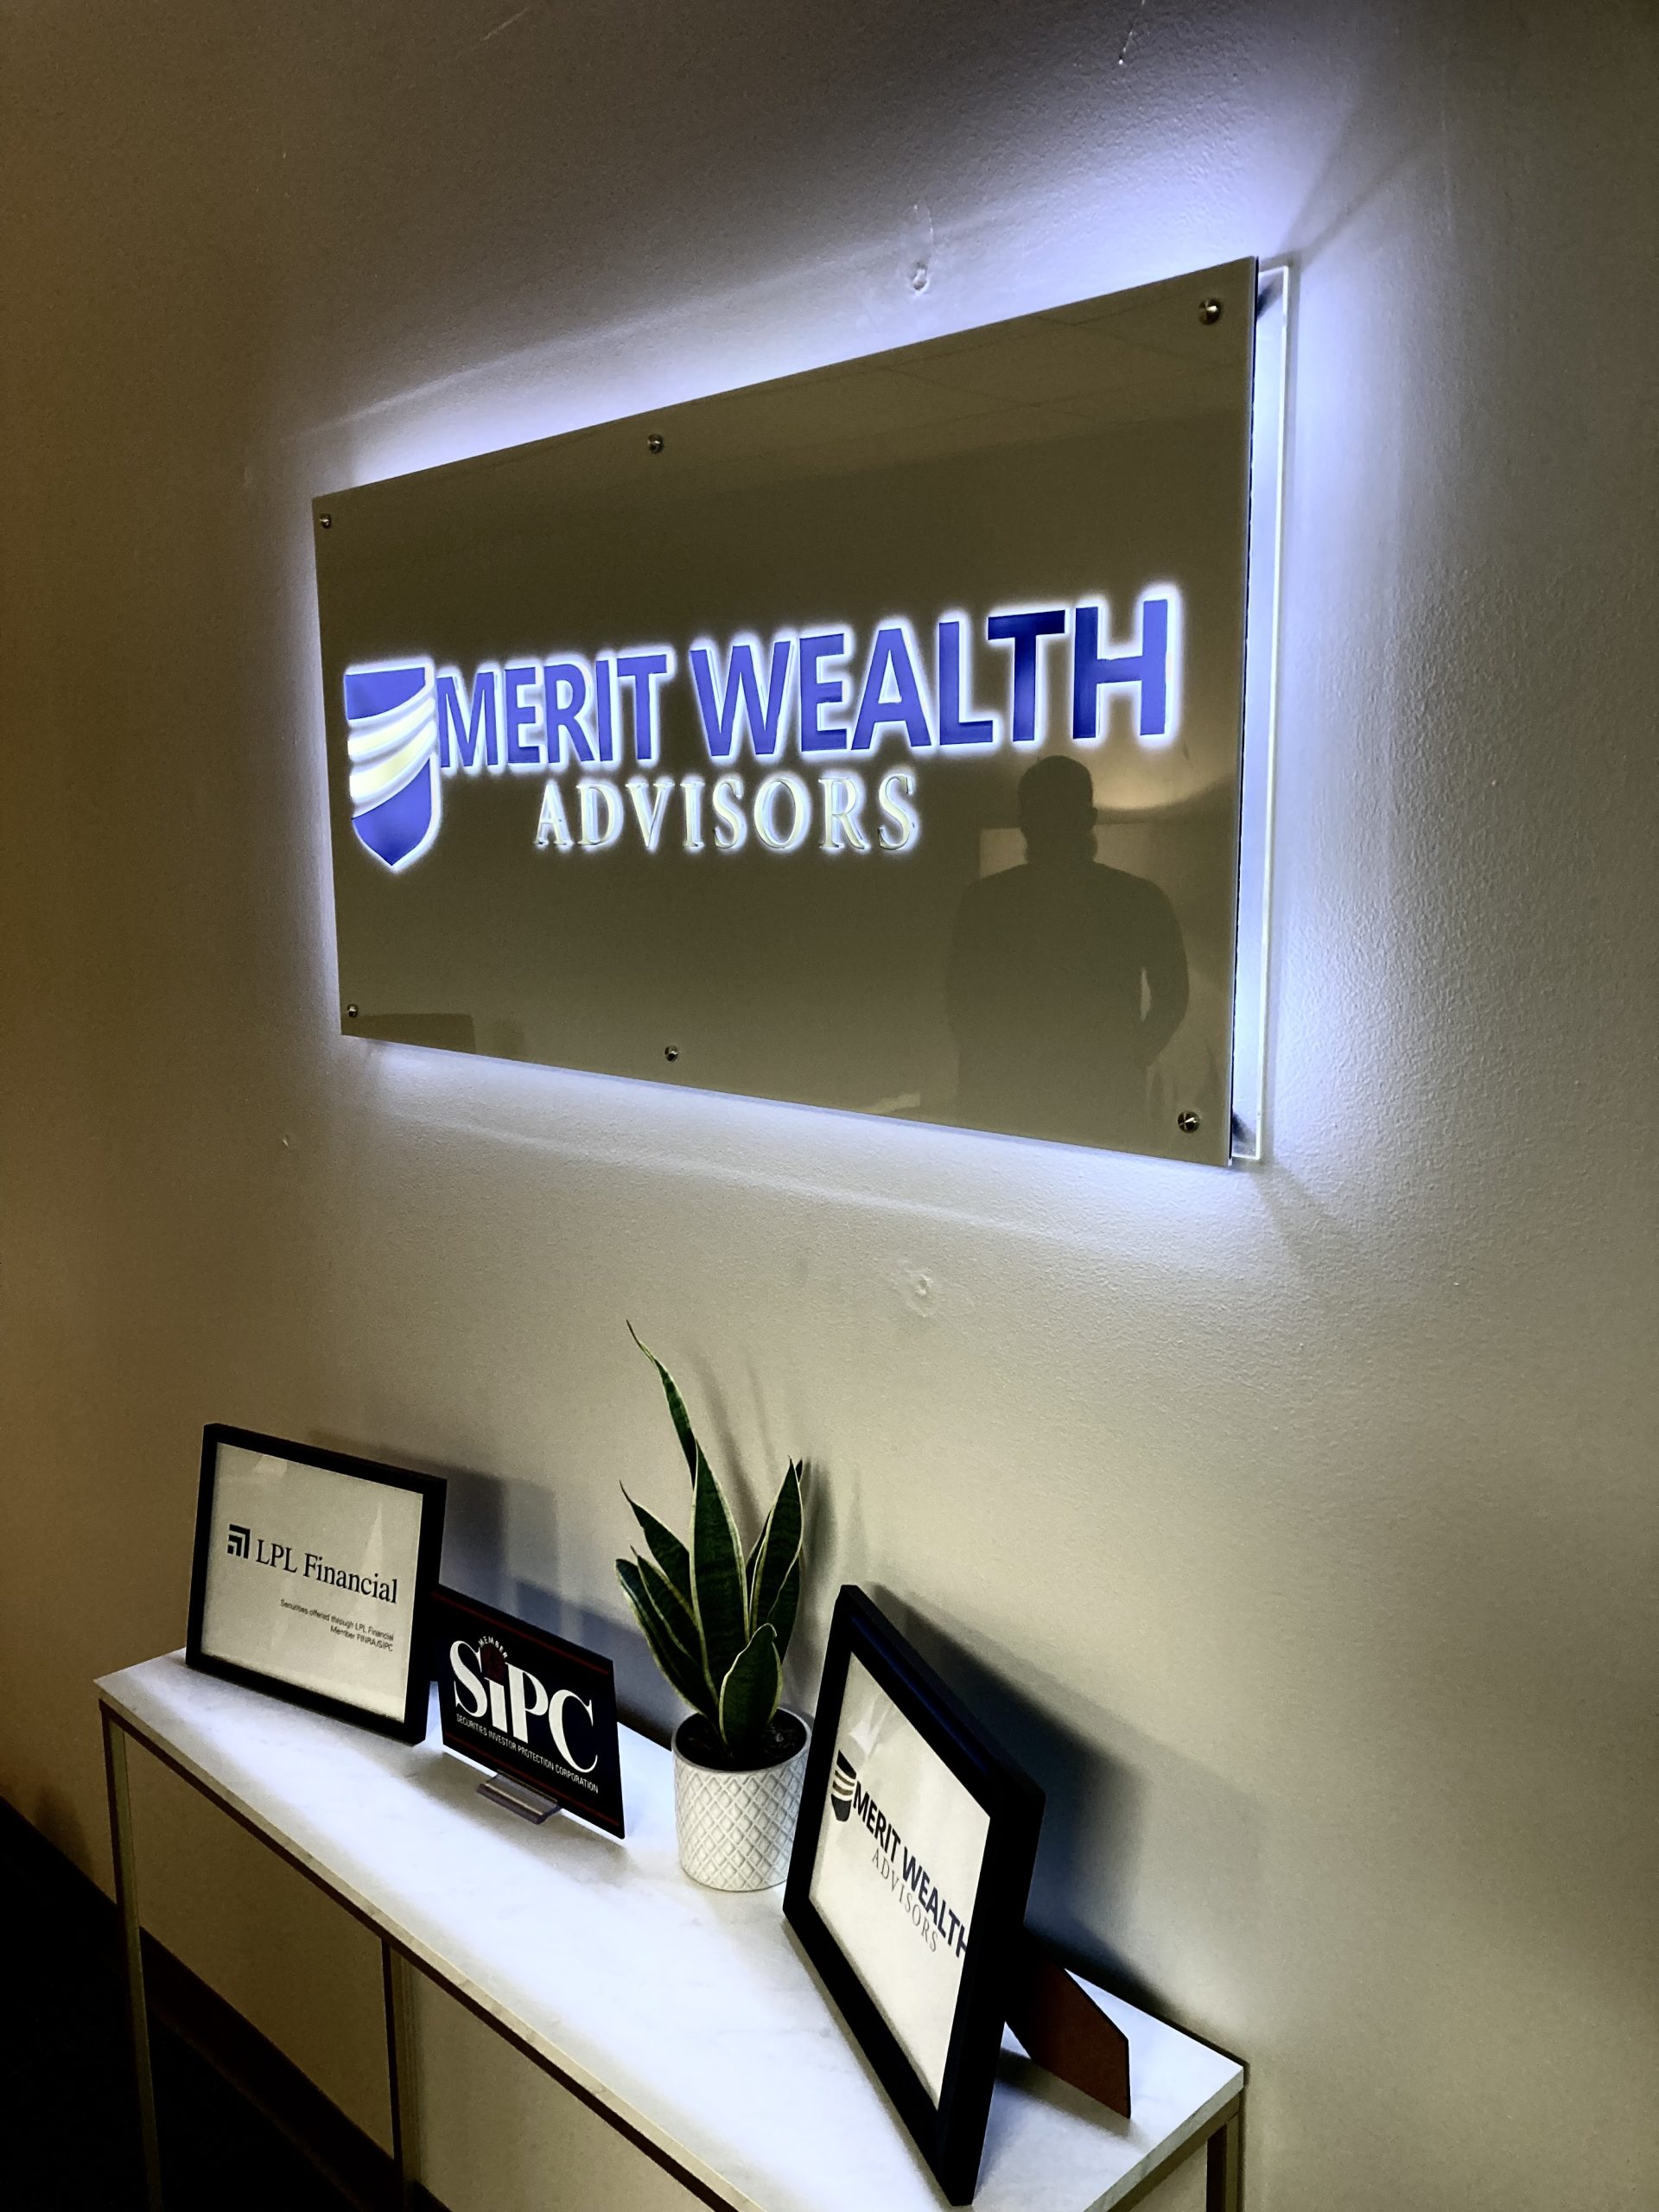 lighted lobby sign of Merit Wealth business in Orlando, FL